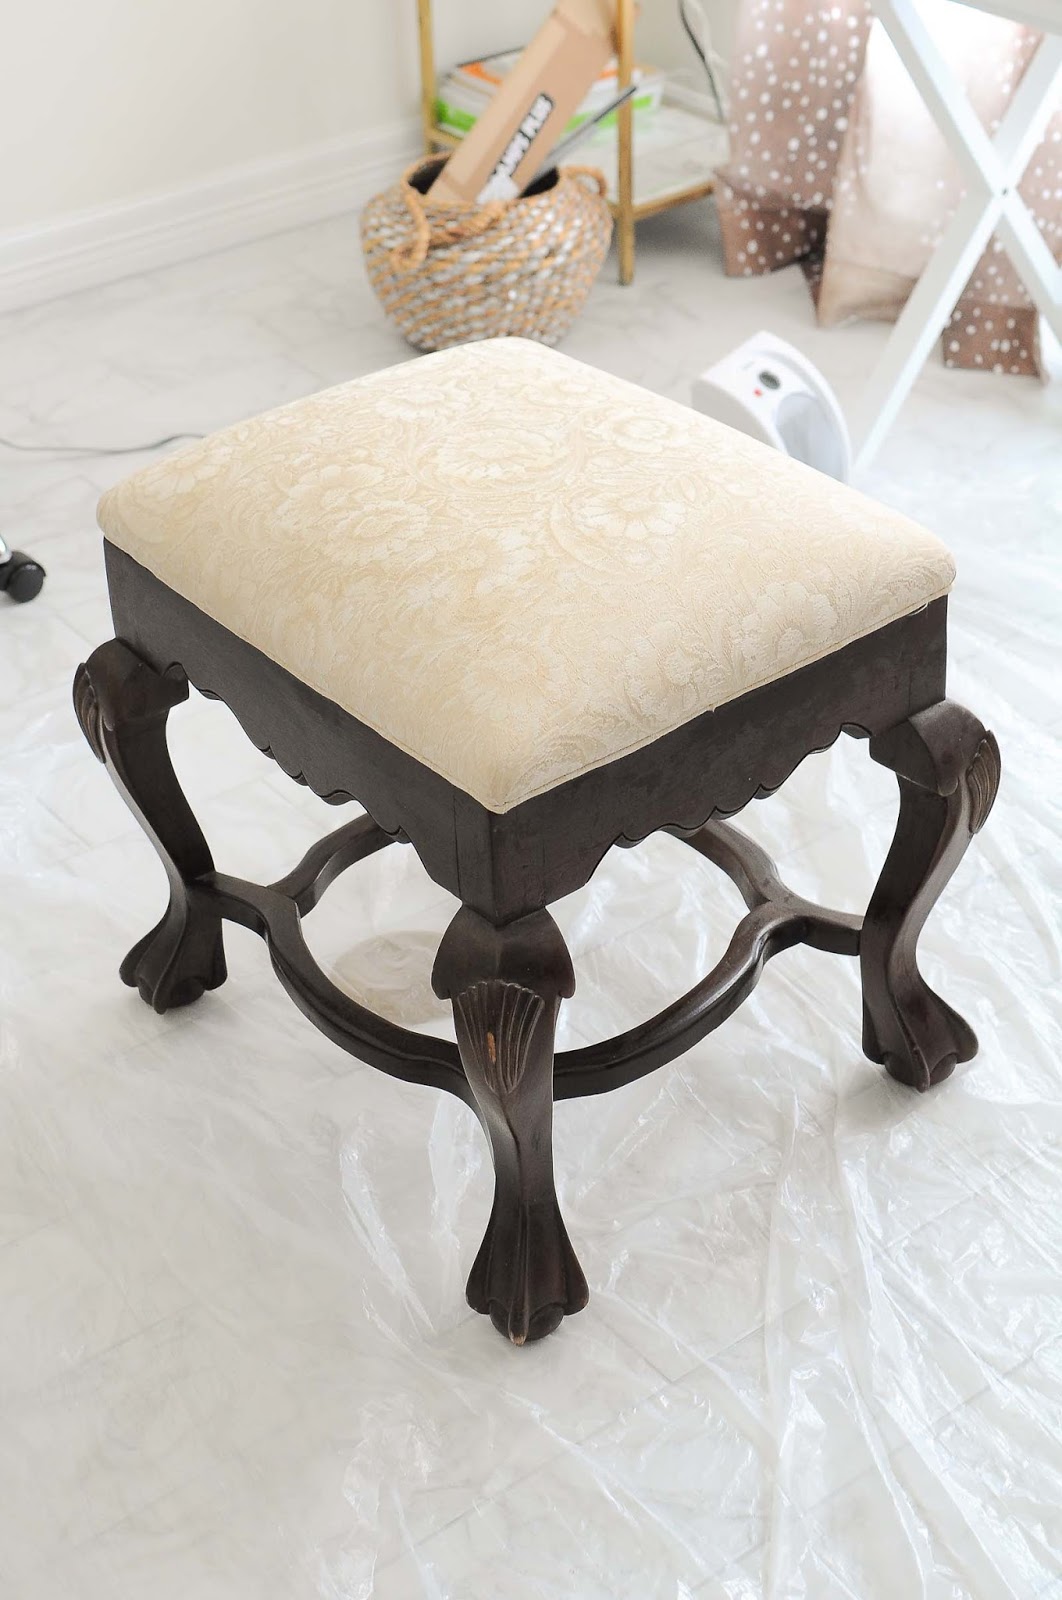 A thrift store ottoman gets a DIY black and gold makeover (even the fabric!) using Velvet Finishes paint.